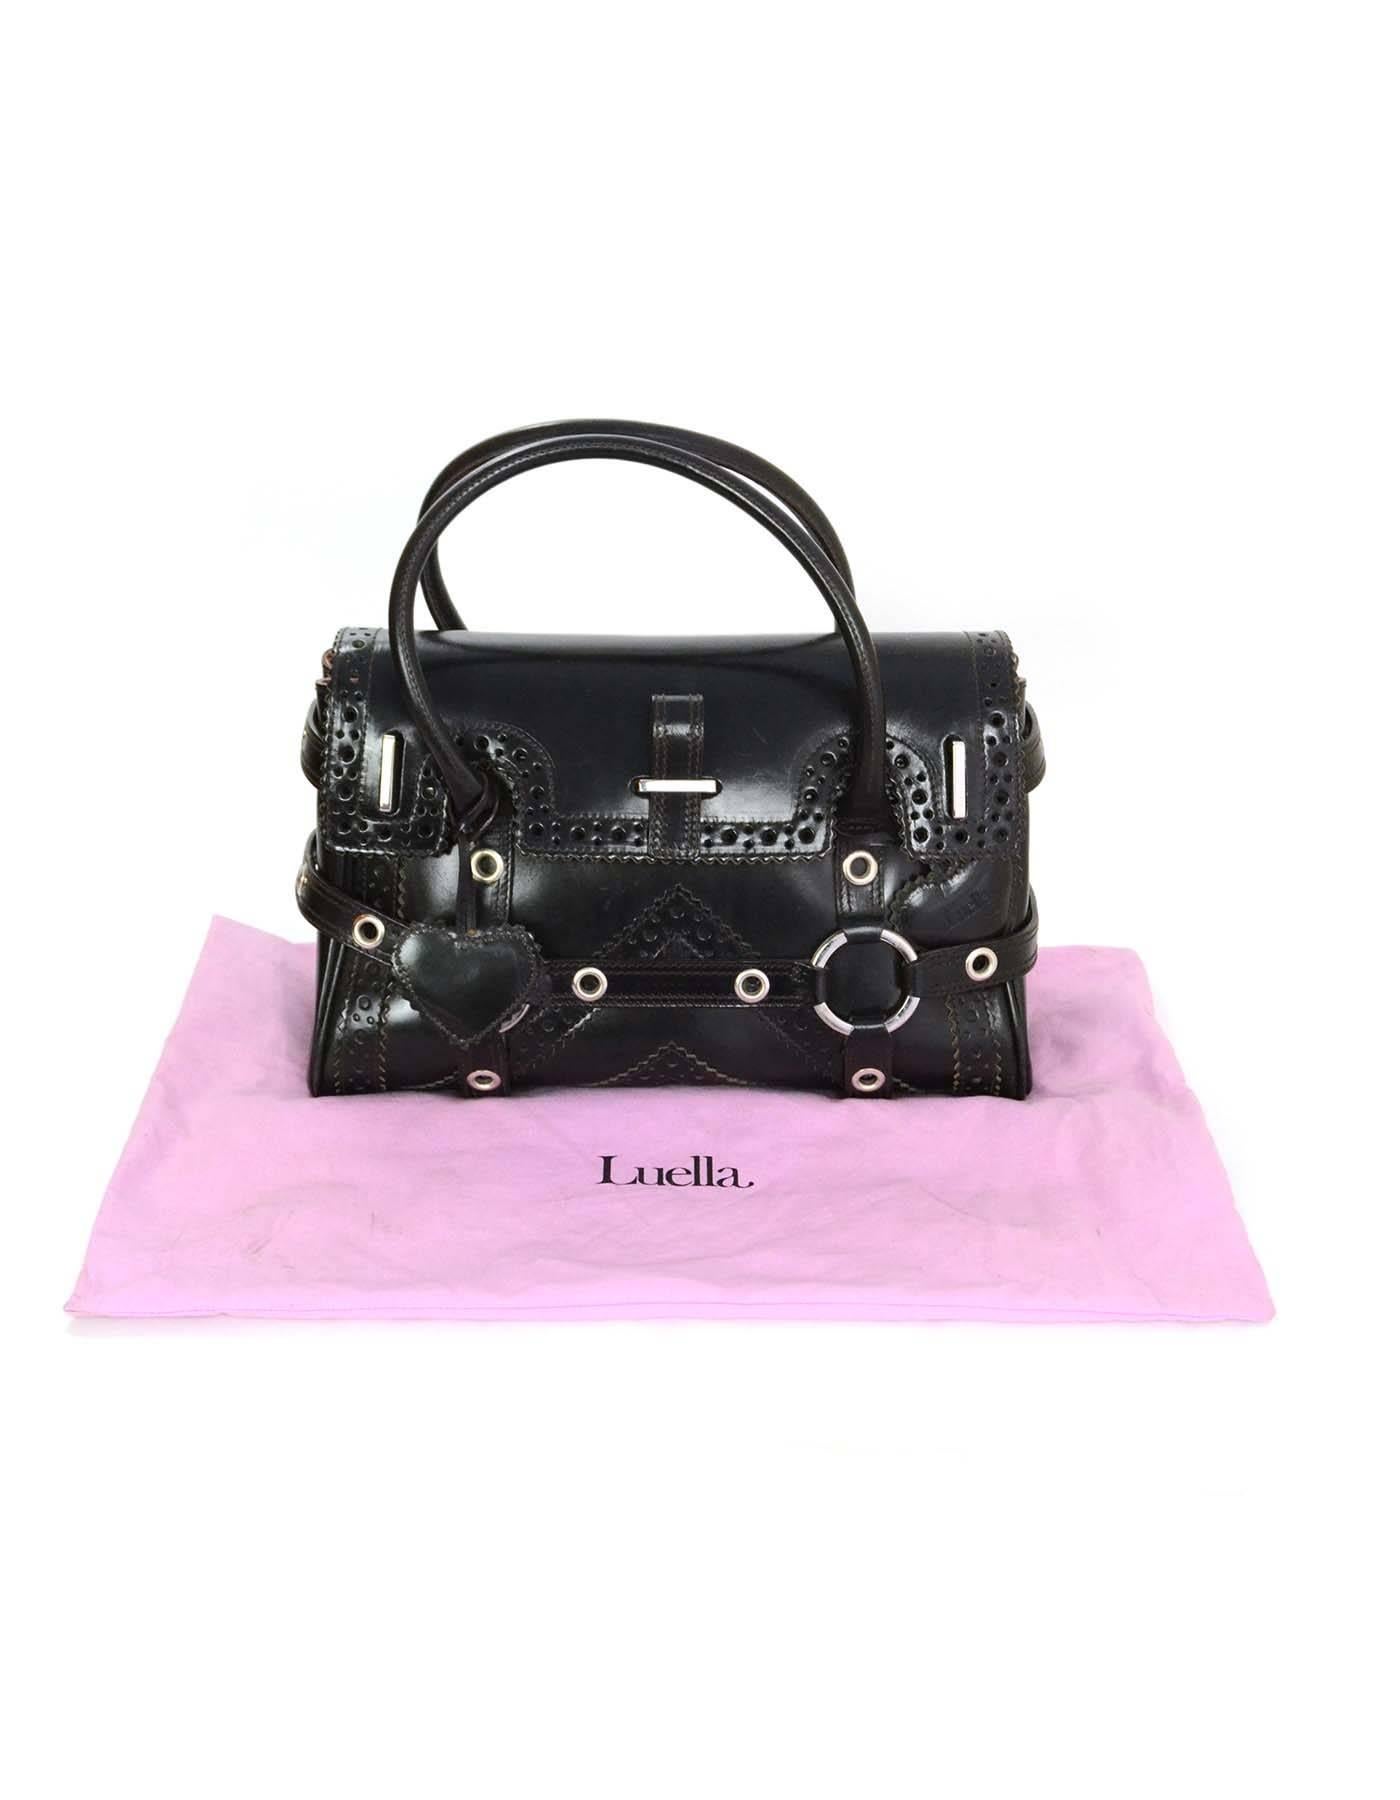 Luella Black Leather Bartley Handbag with SHW and Perforated Detail 3